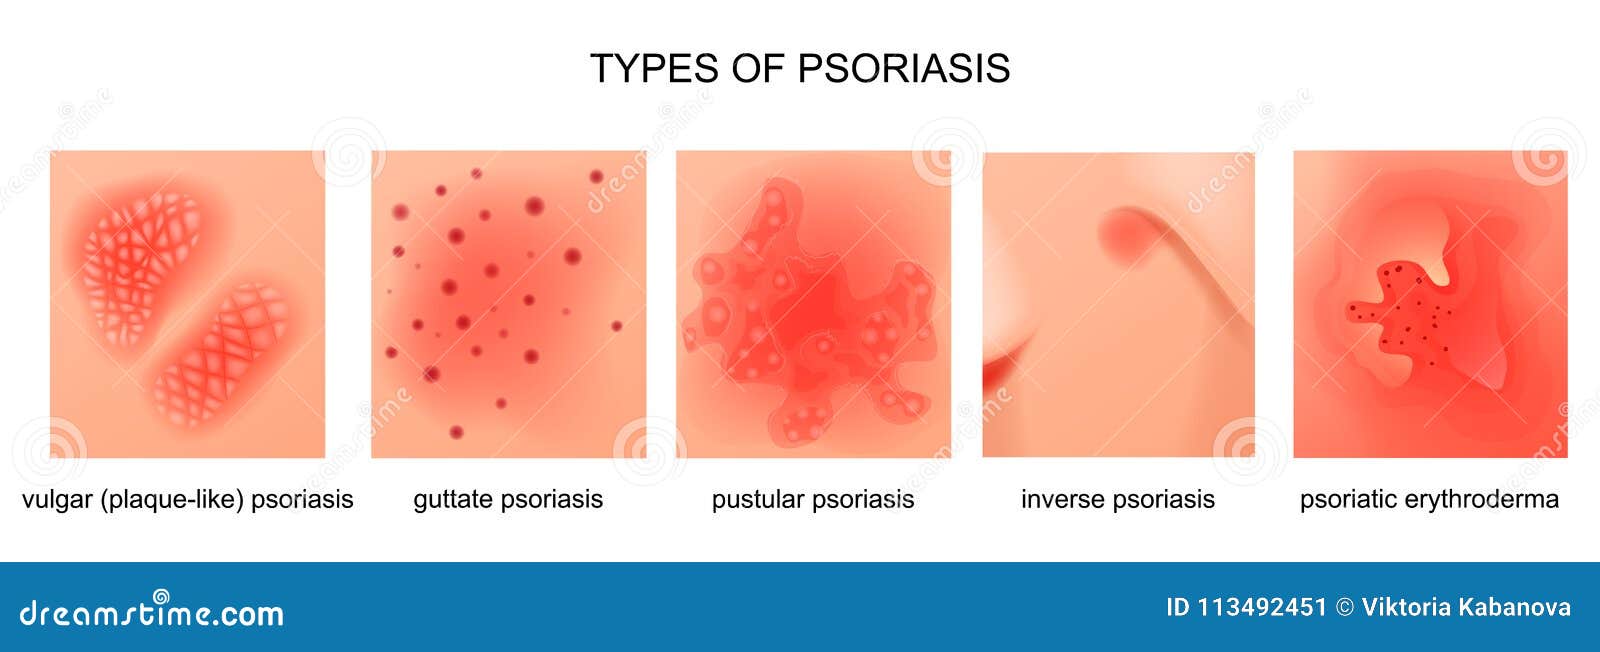 Psoriasis Cartoons, Illustrations & Vector Stock Images - 1786 Pictures